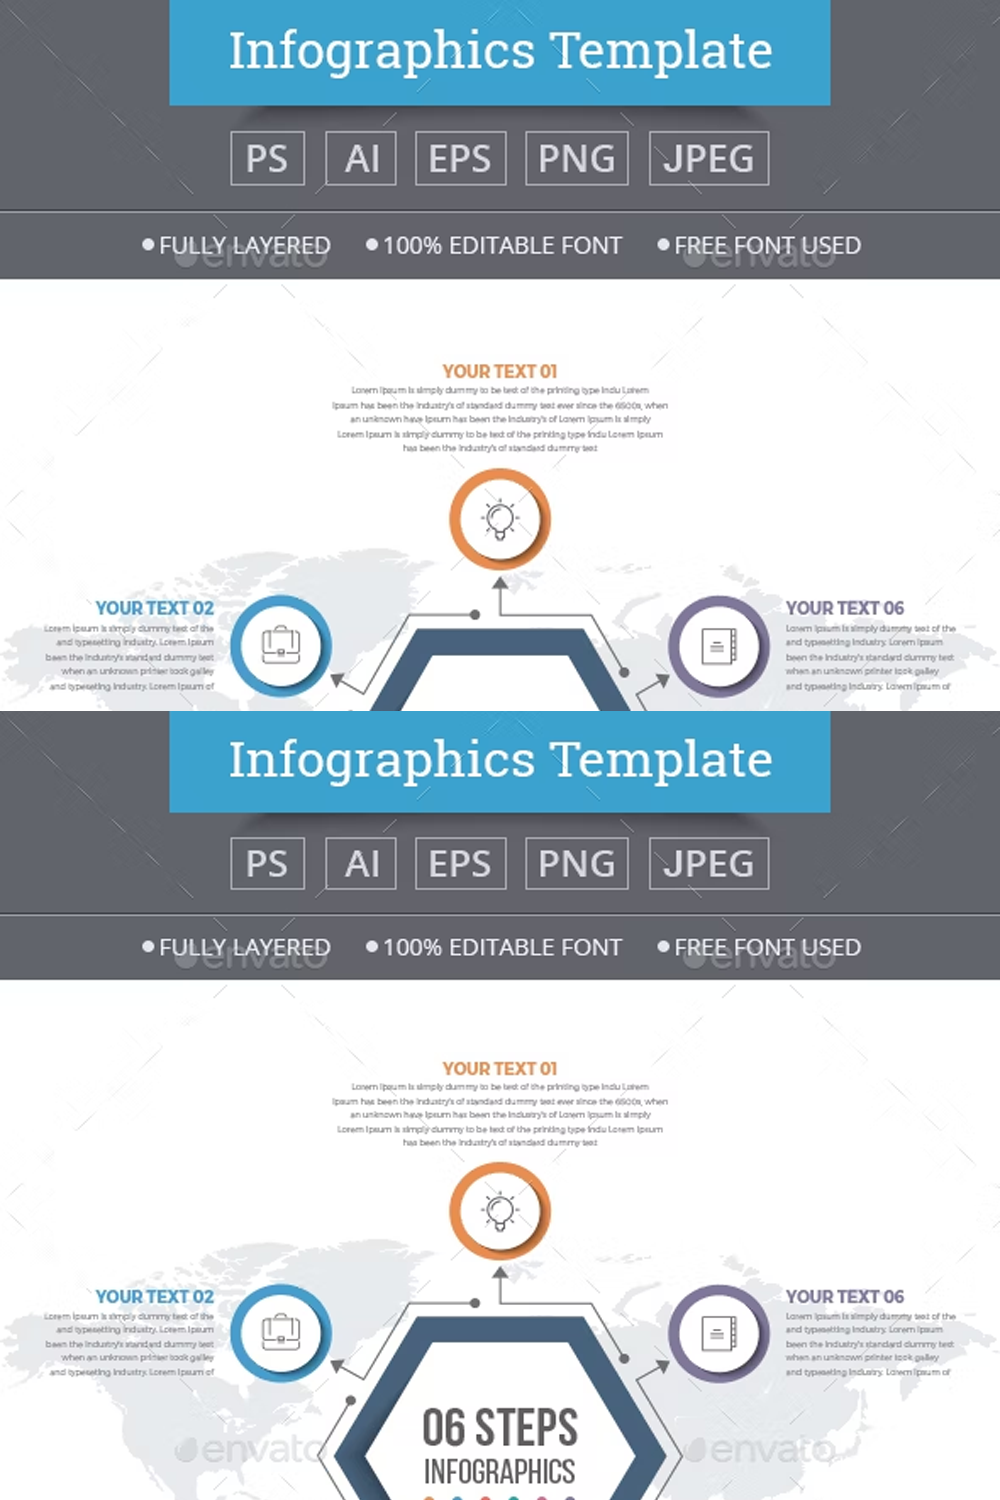 Illustrations infographics template with 06 steps of pinterest.